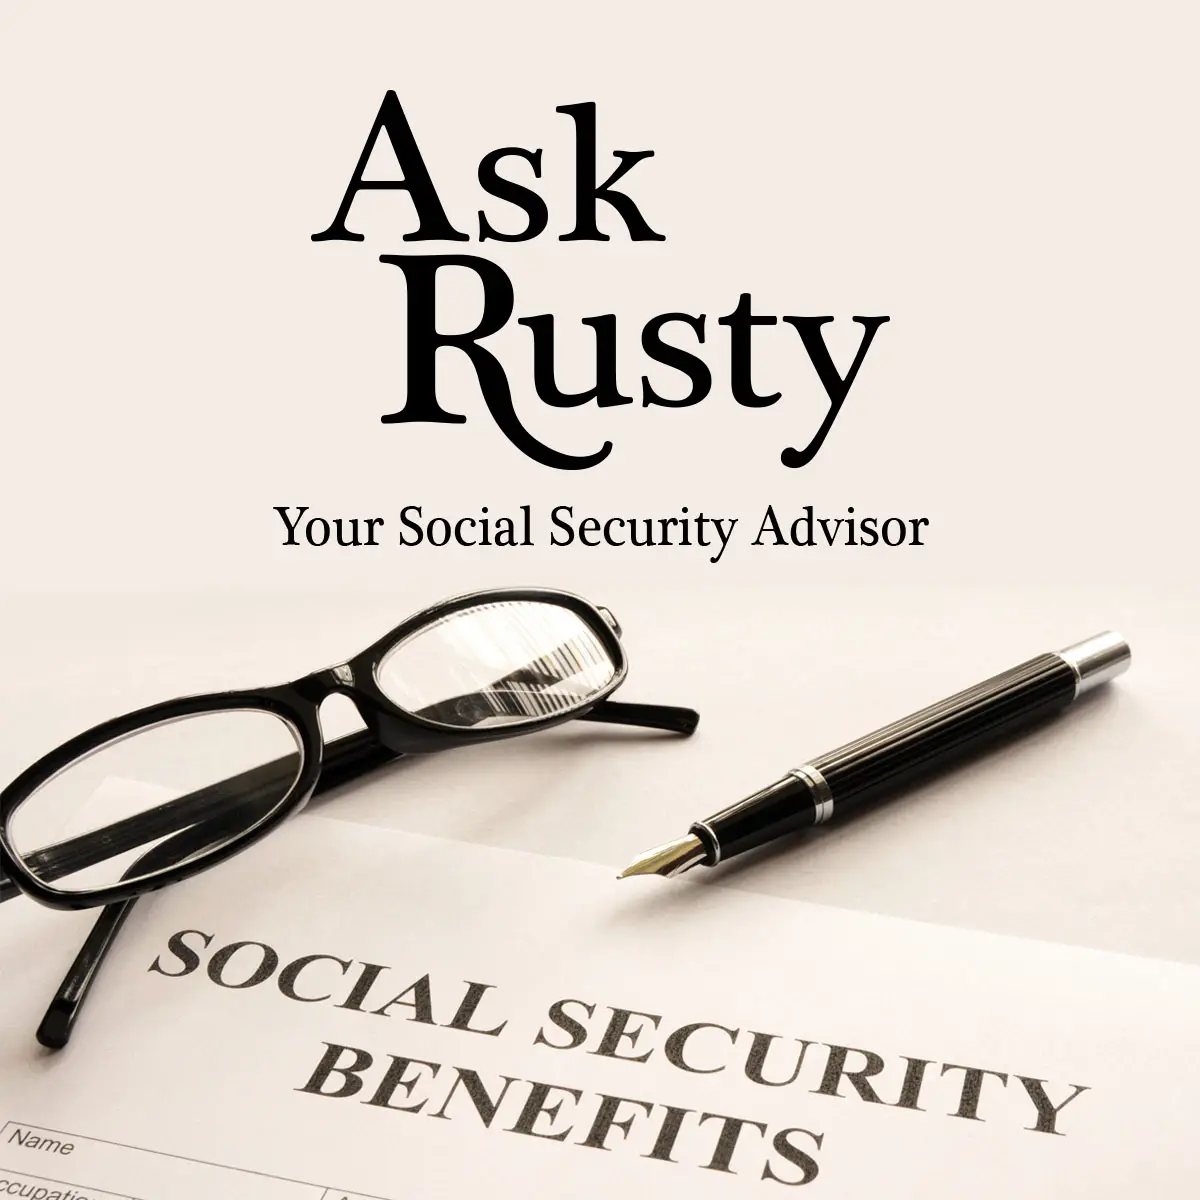 Can I Get Medicare Without Claiming Social Security?